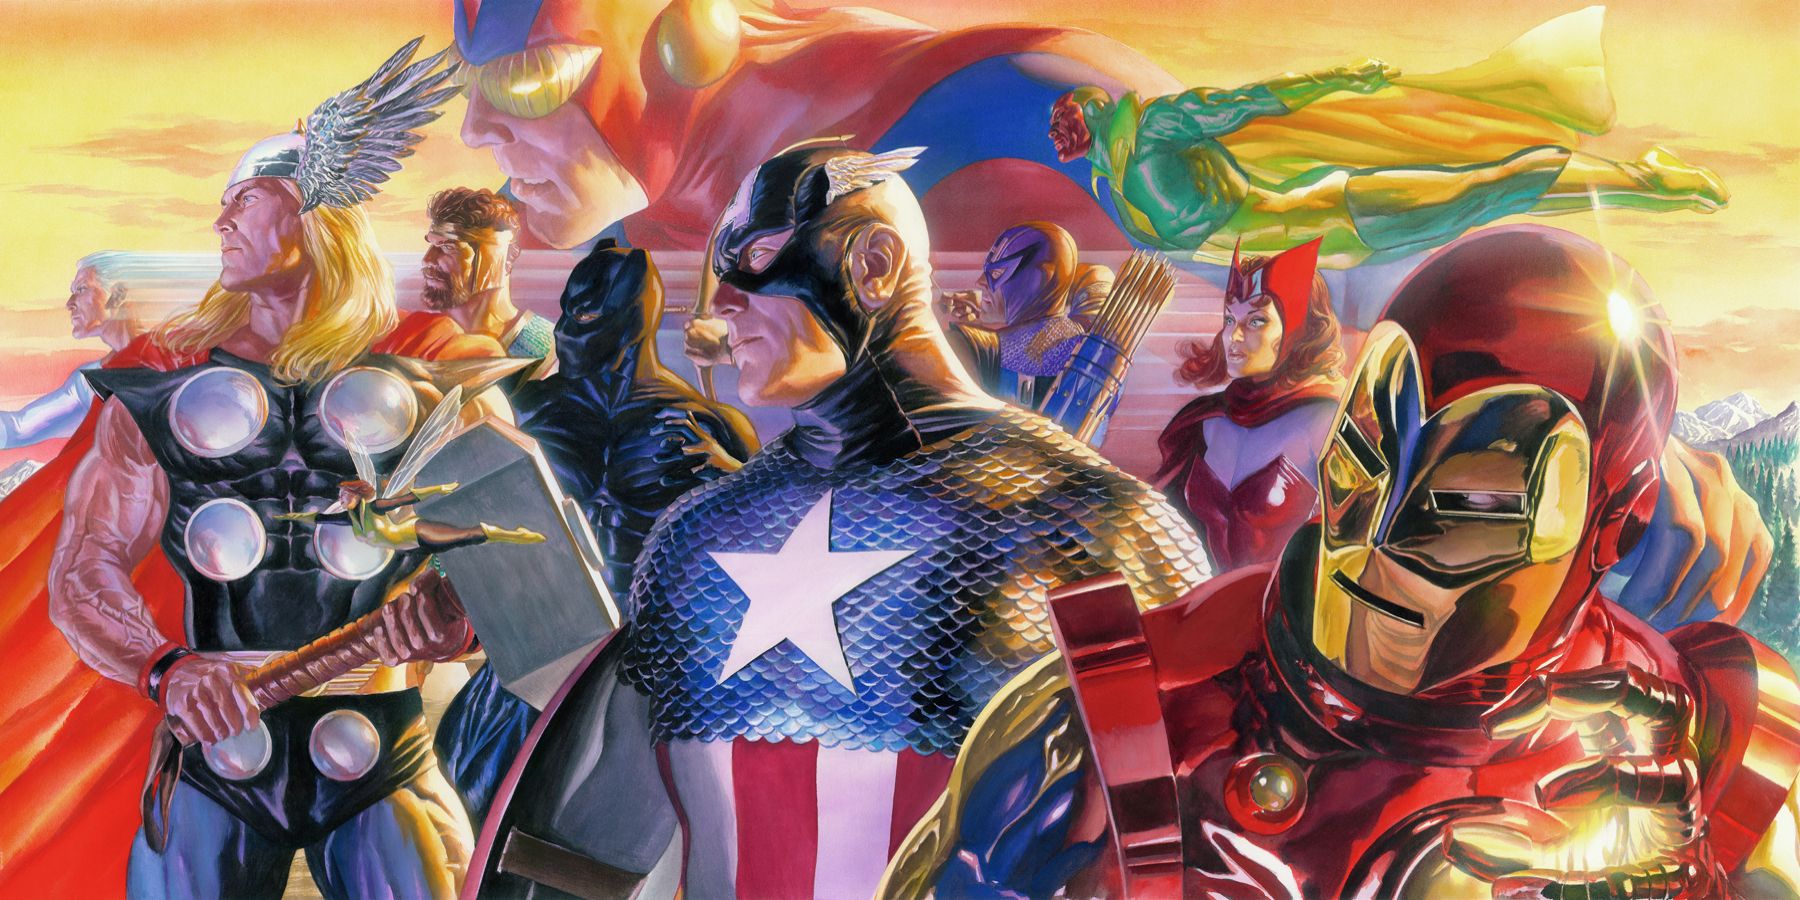 Captain America leads the Avengers into battle in Marvel Comics.